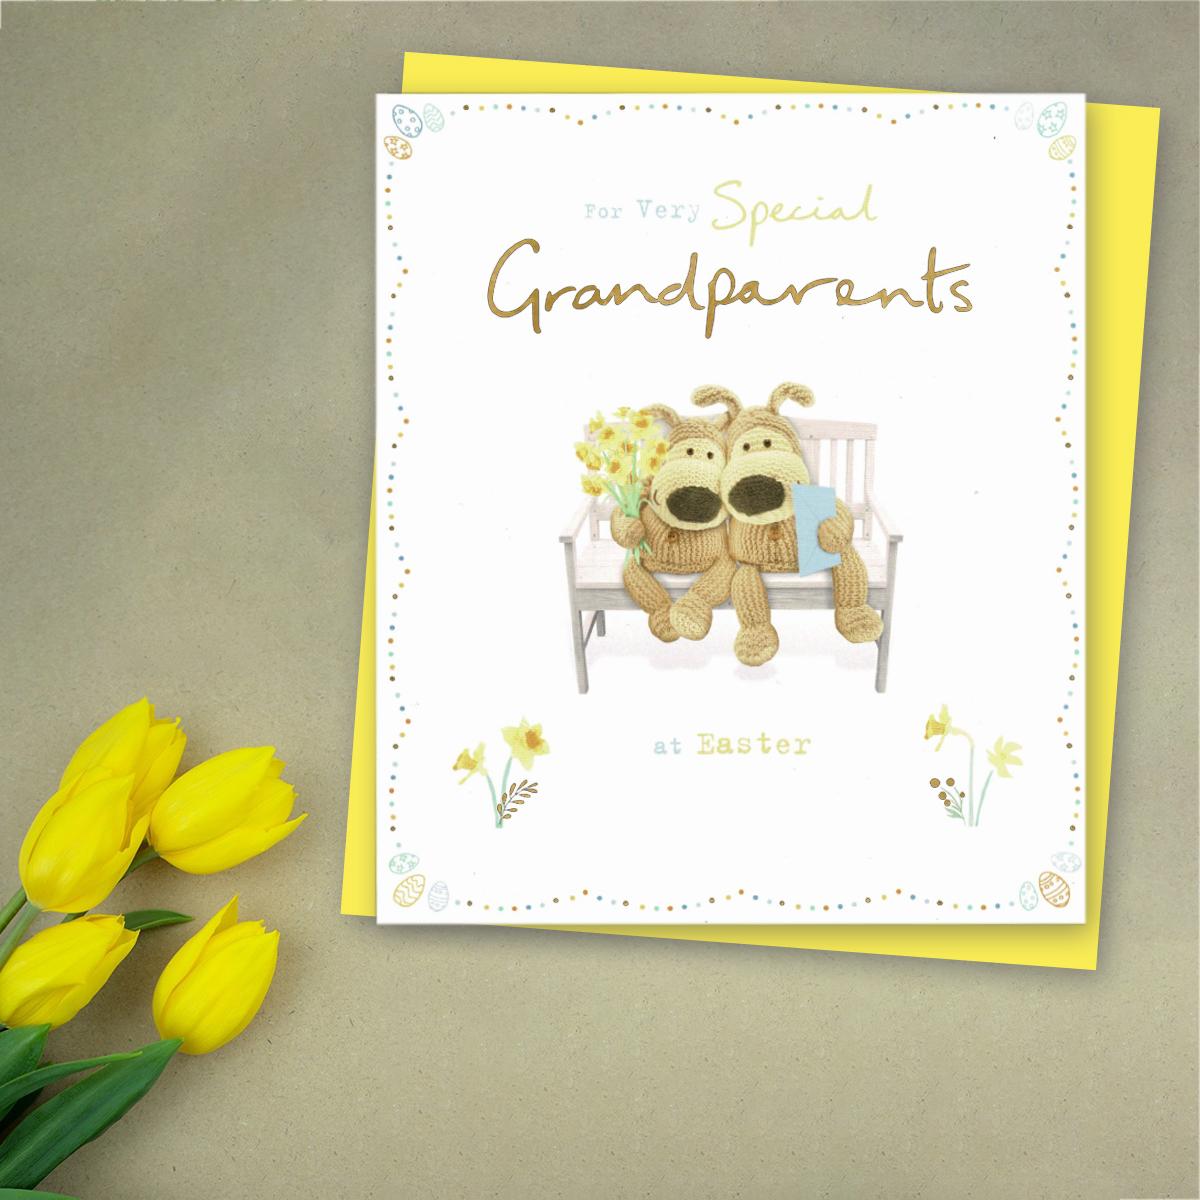 ' For Very Special Grandparents At Easter' Card Featuring Boofle Bear ! Complete With Yellow Envelope